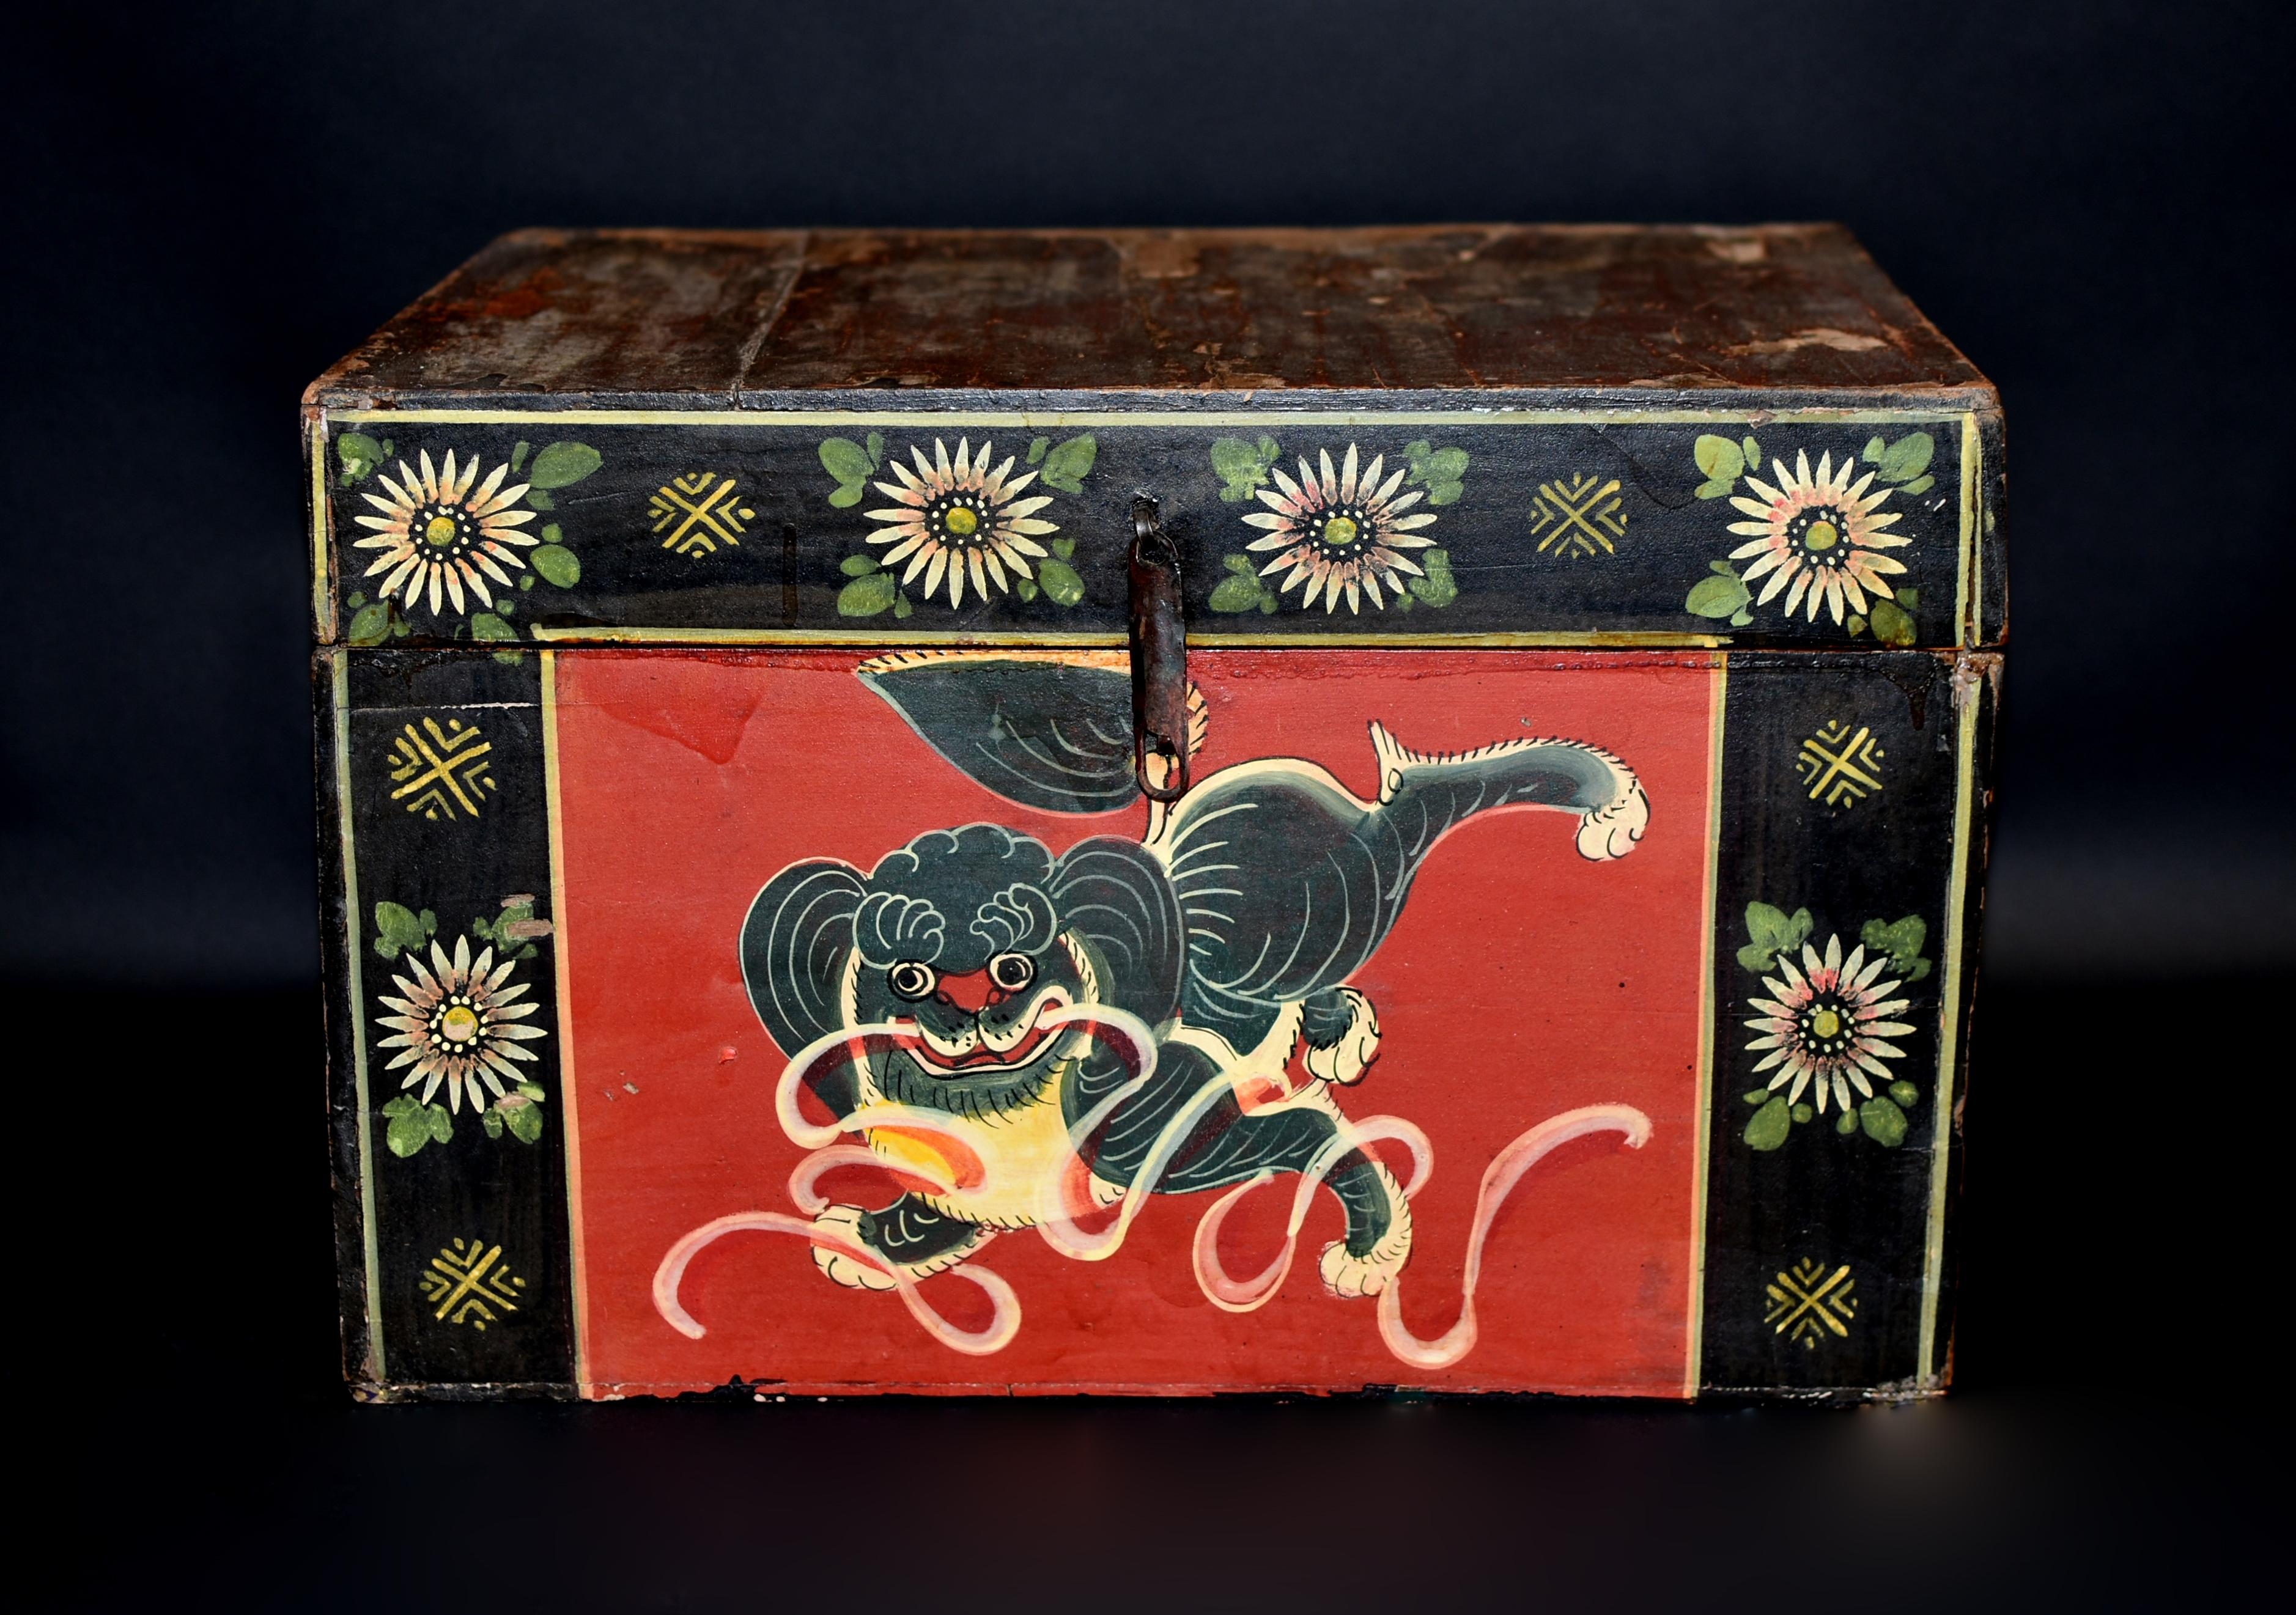 LAST ONE of our spectacular antique foo dog box collection. This box features an adorable foo dog playing with ribbons. The large head with big innocent eyes and red lips is framed by curled mane. Fleshy paws pressing into the ground, with a wavy